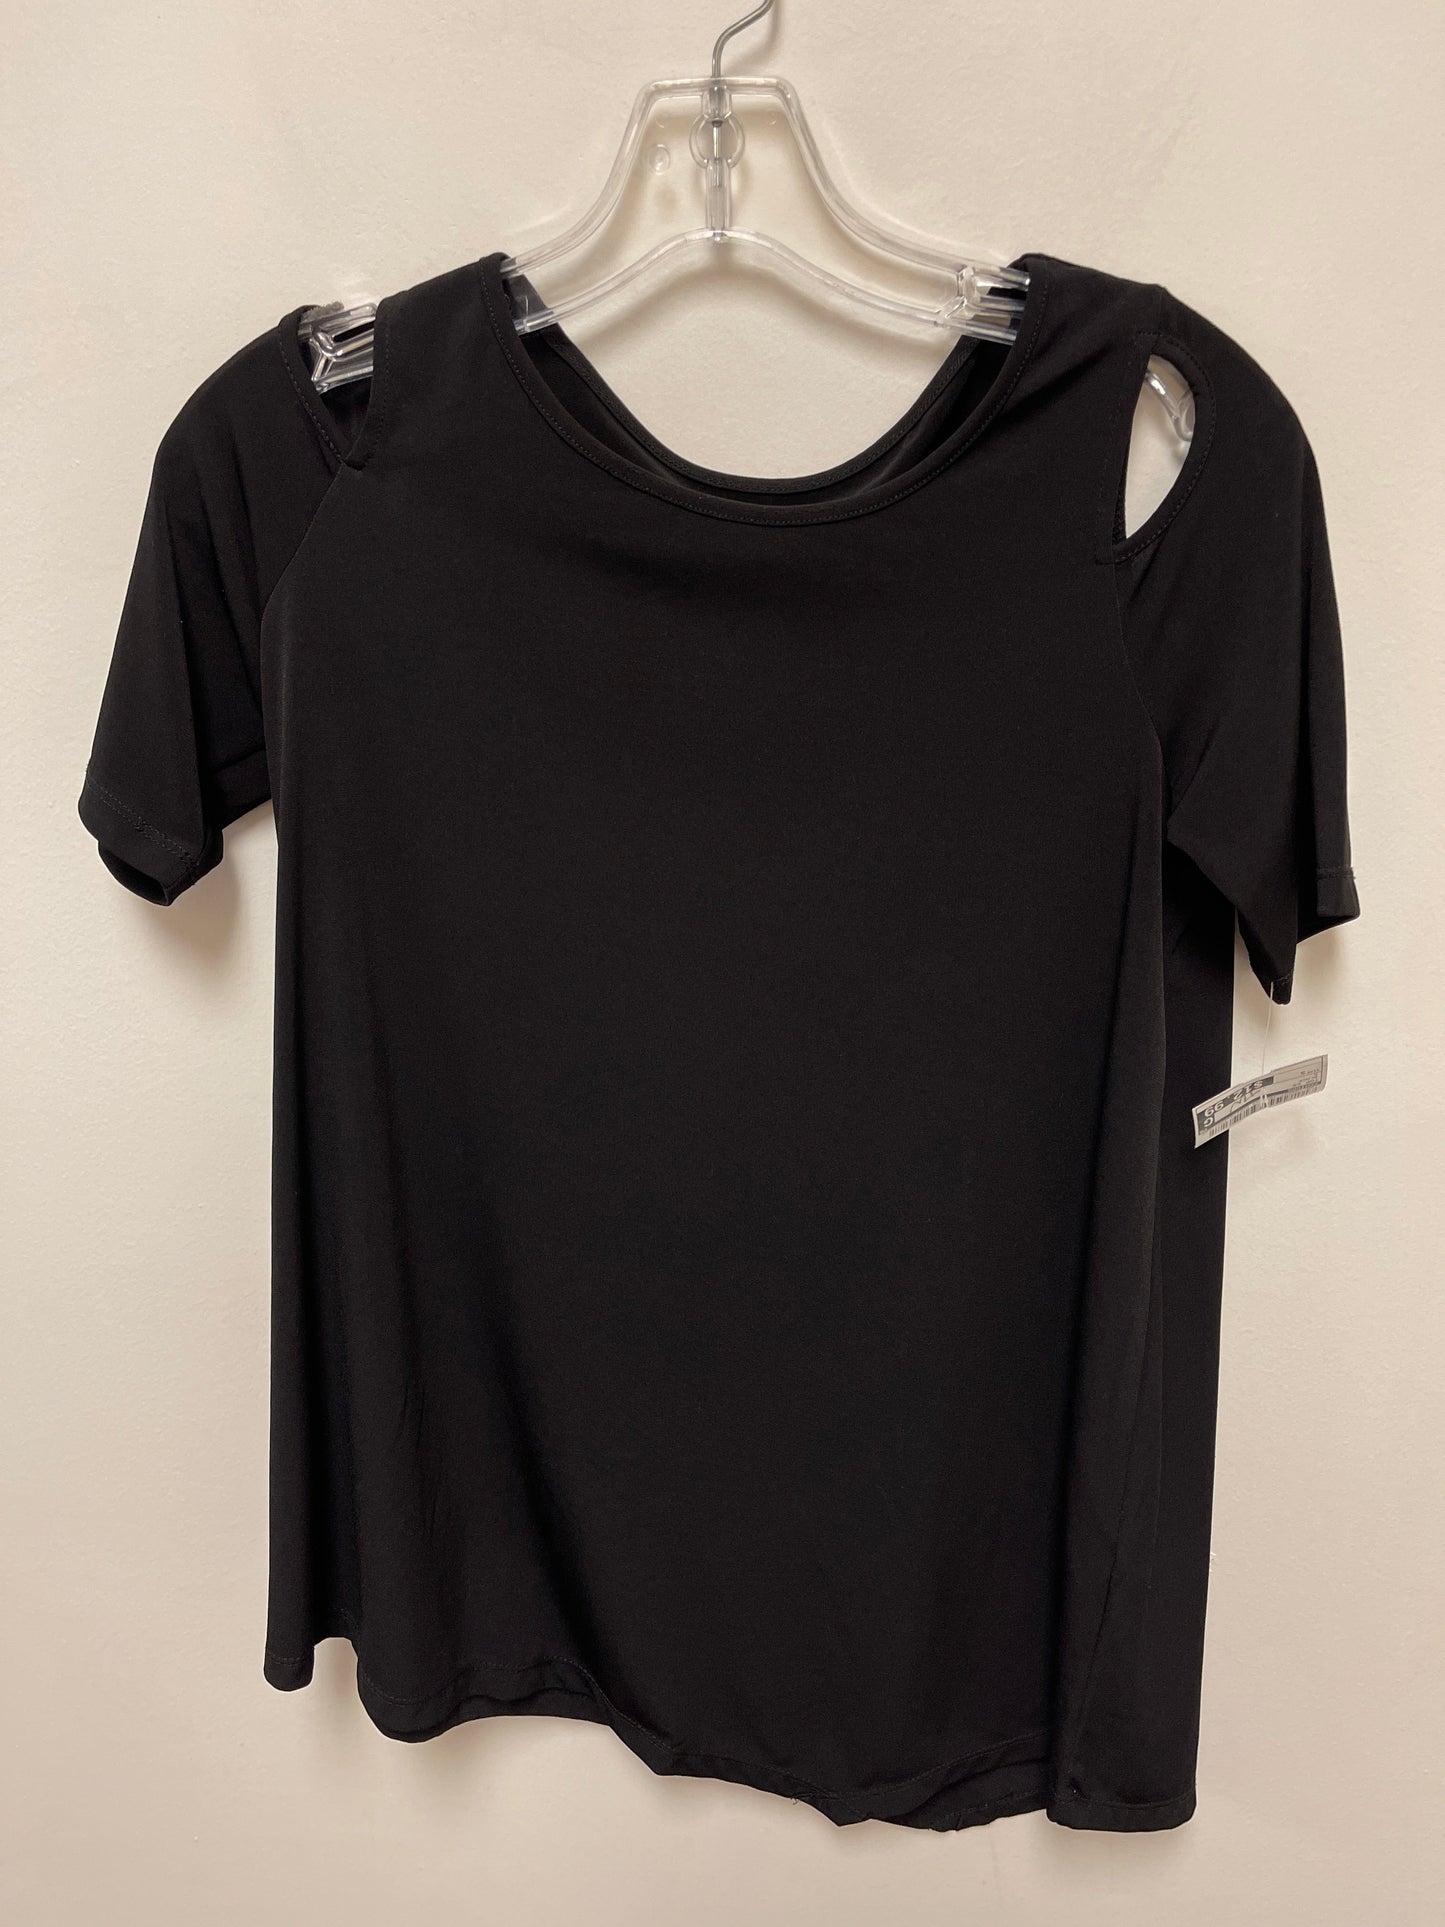 Black Top Short Sleeve Chicos, Size S